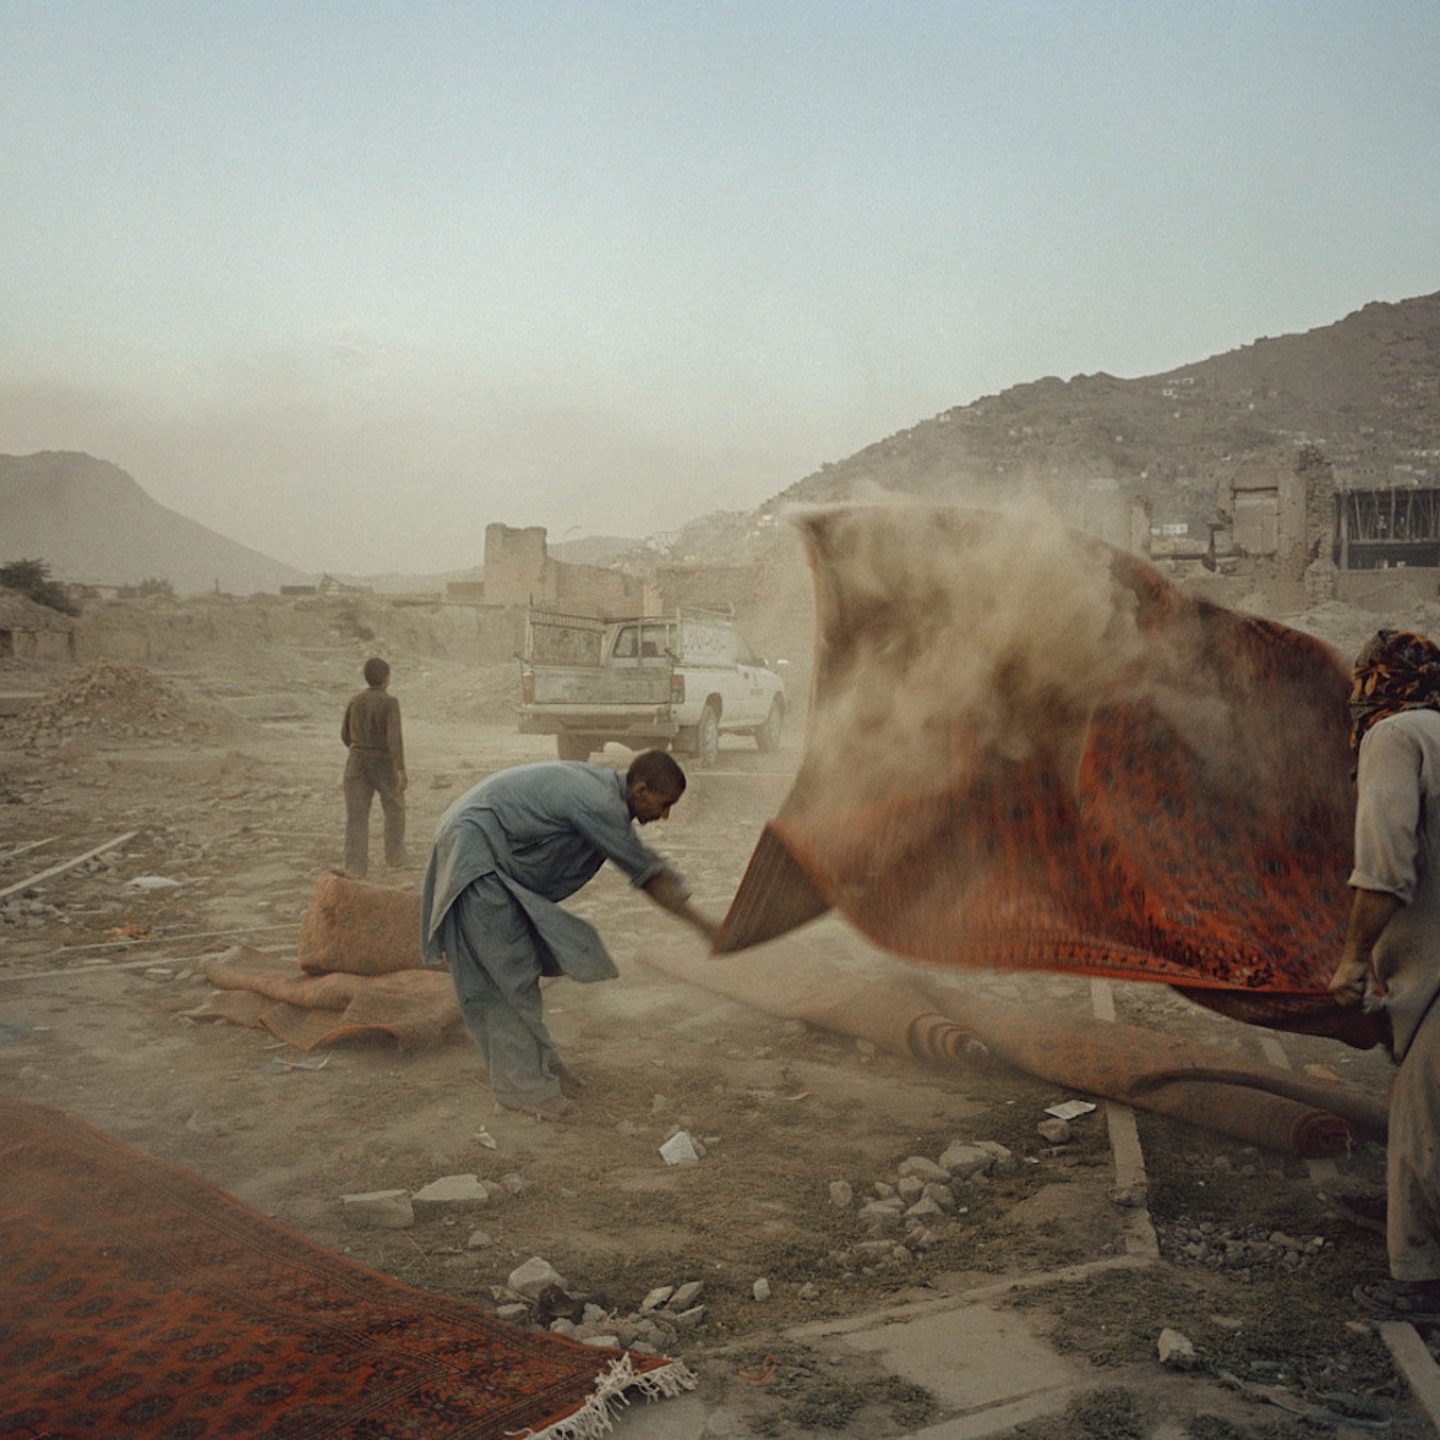 AFGHANISTAN. Kabul. 2004. Men shake dust from rugs that were used for a wedding party.